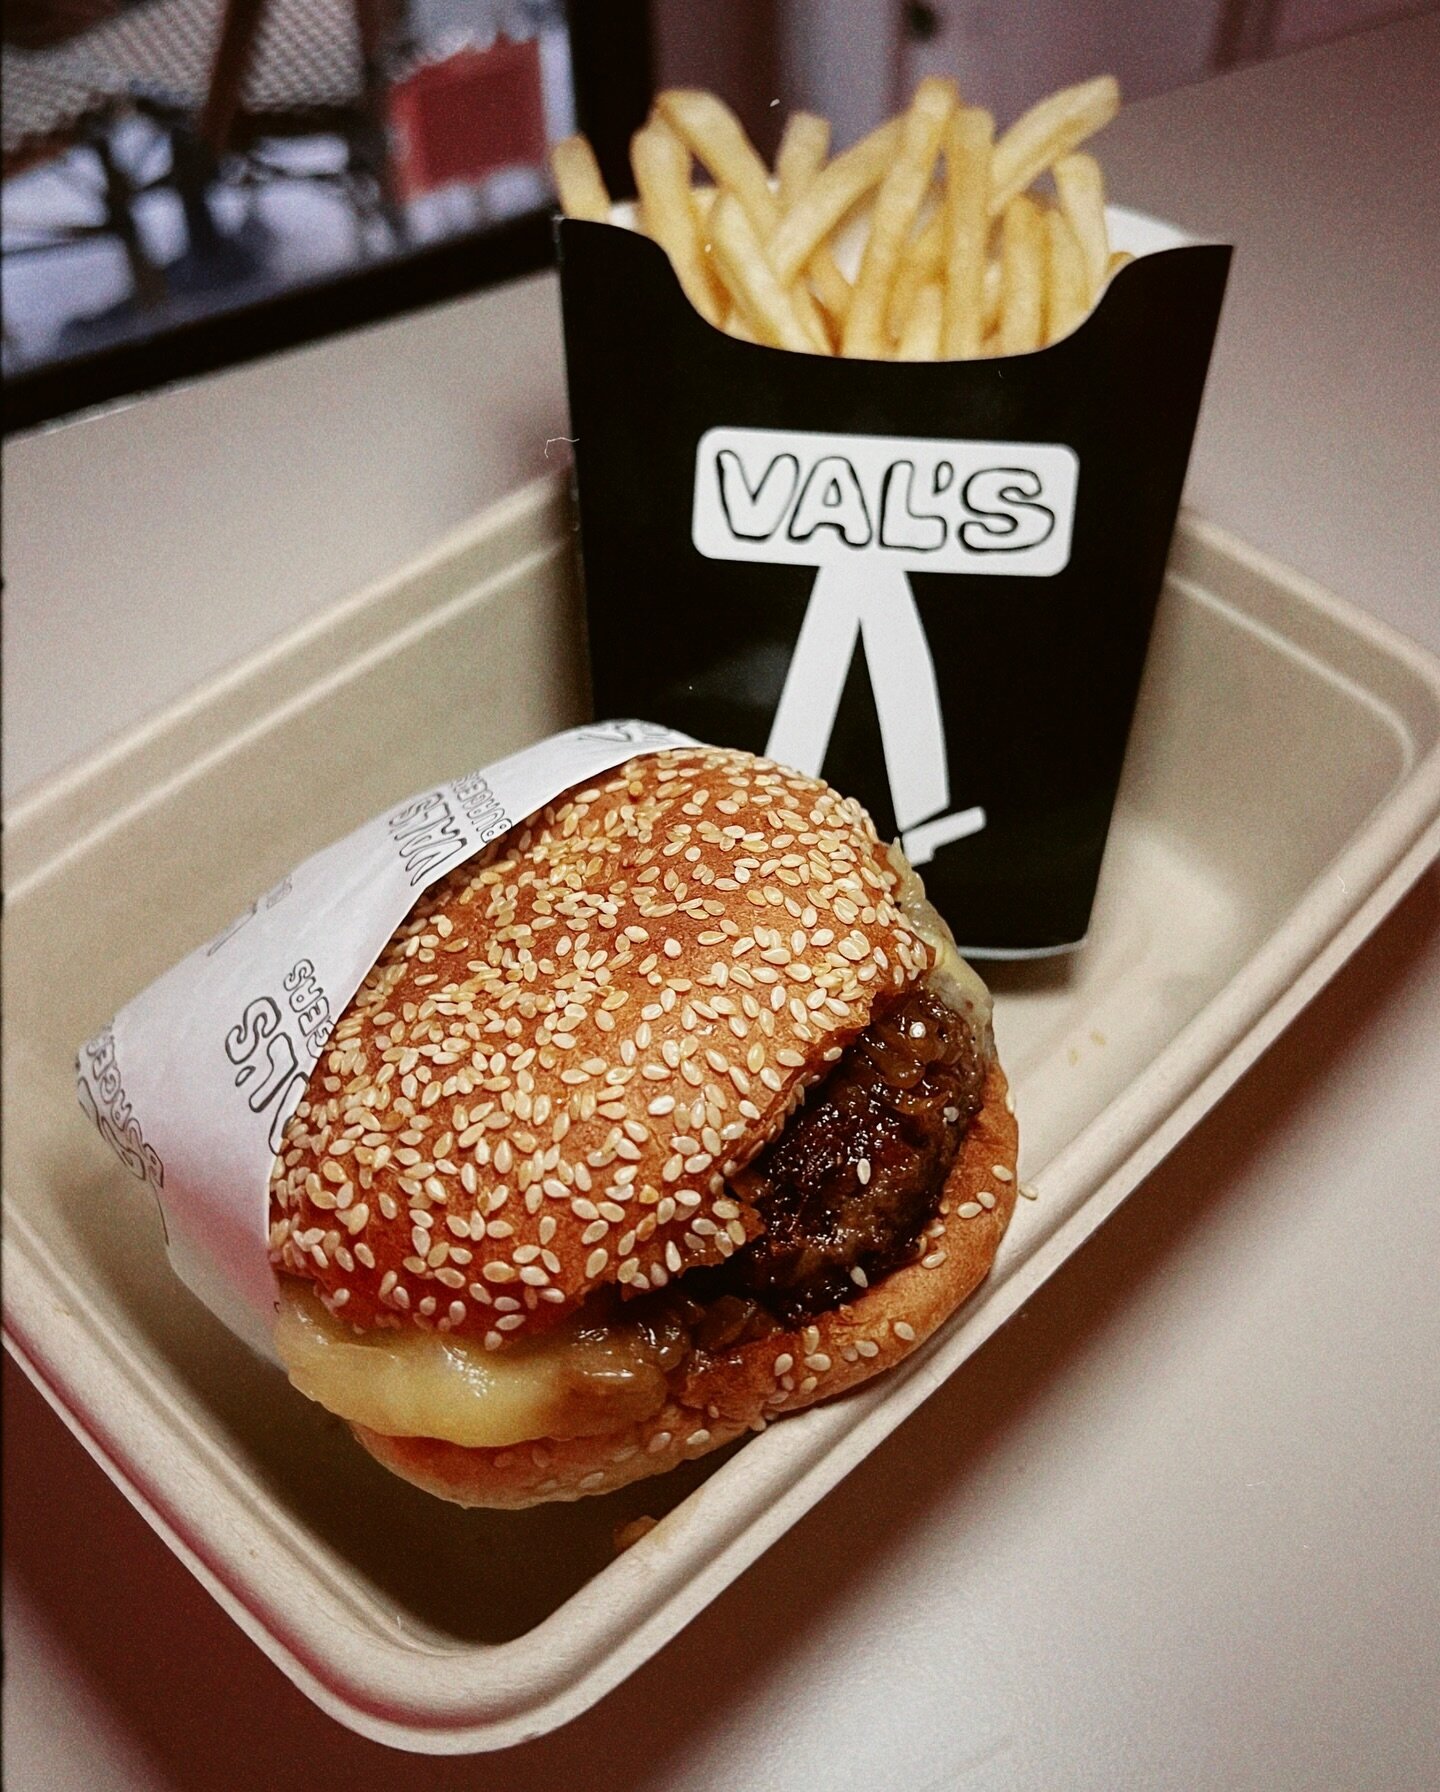 Introducing &ldquo;Vals Burgers&rdquo; on Door Dash. The same delicious-ass burger and fries from our menu, available for delivery.